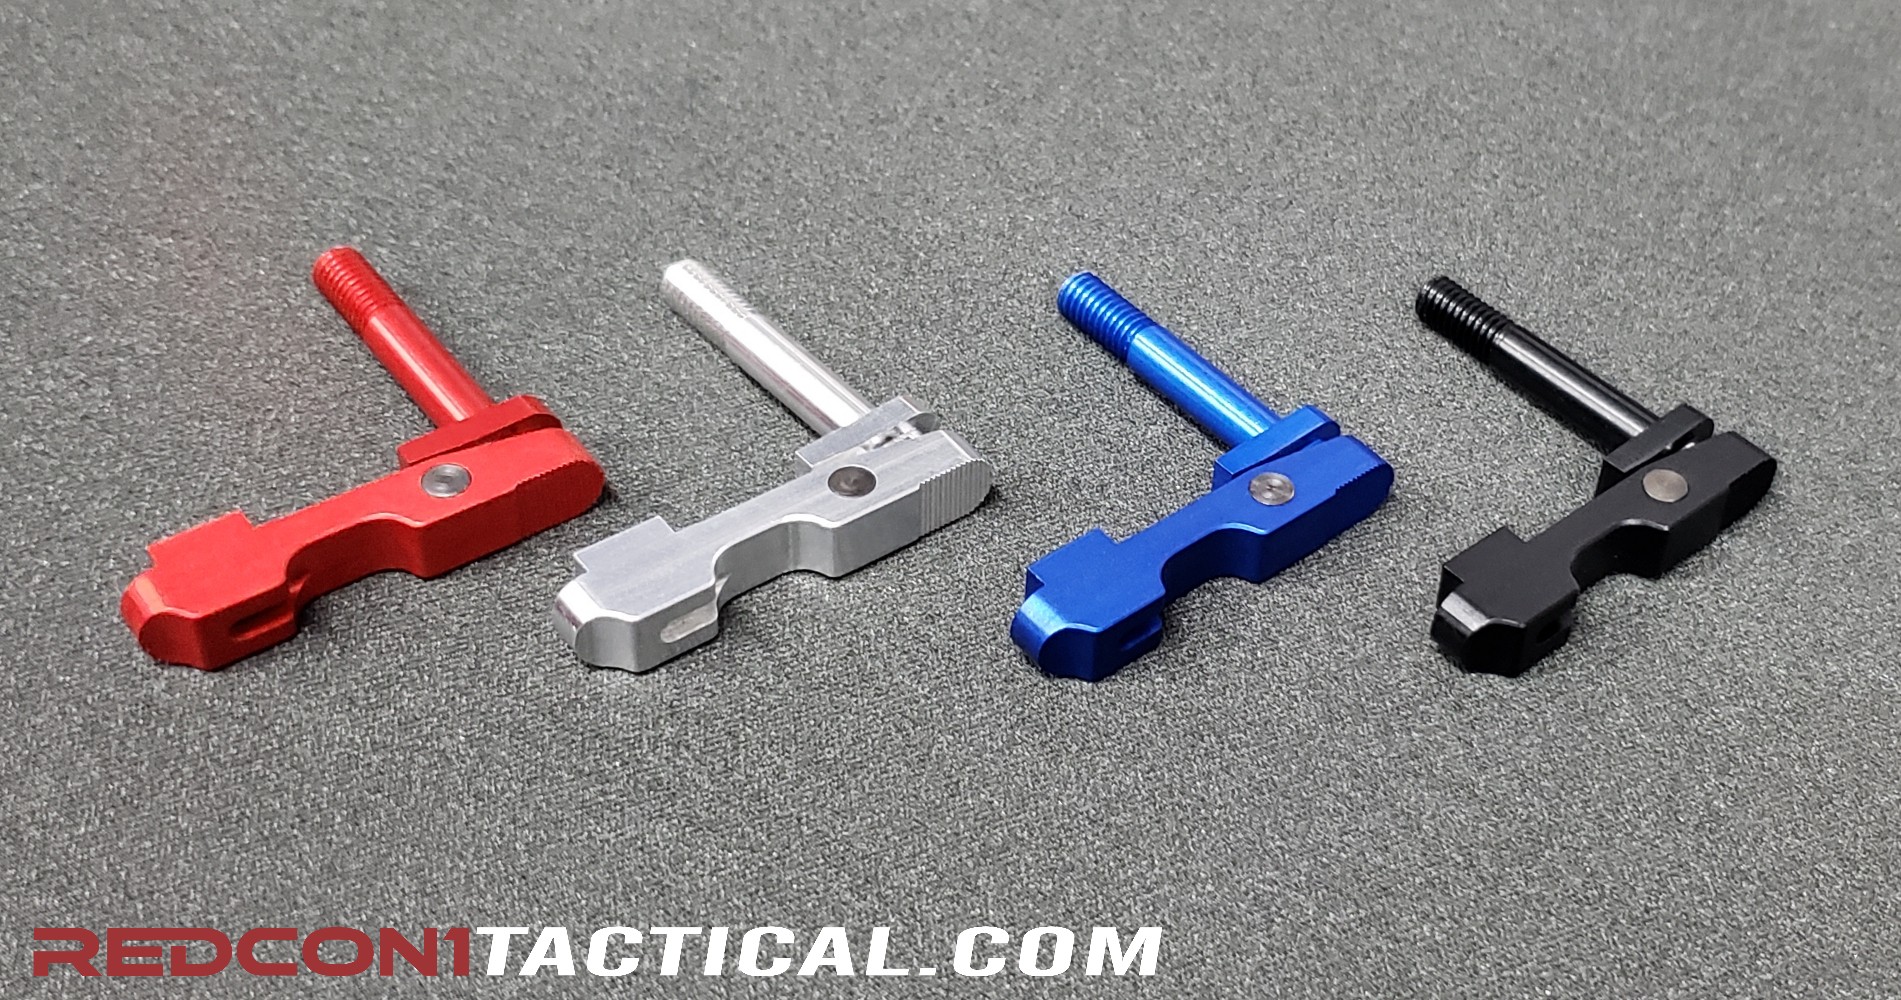 R1 Tactical Aluminum Ambidextrous Magazine Release Anodized Red Silver Blue Black